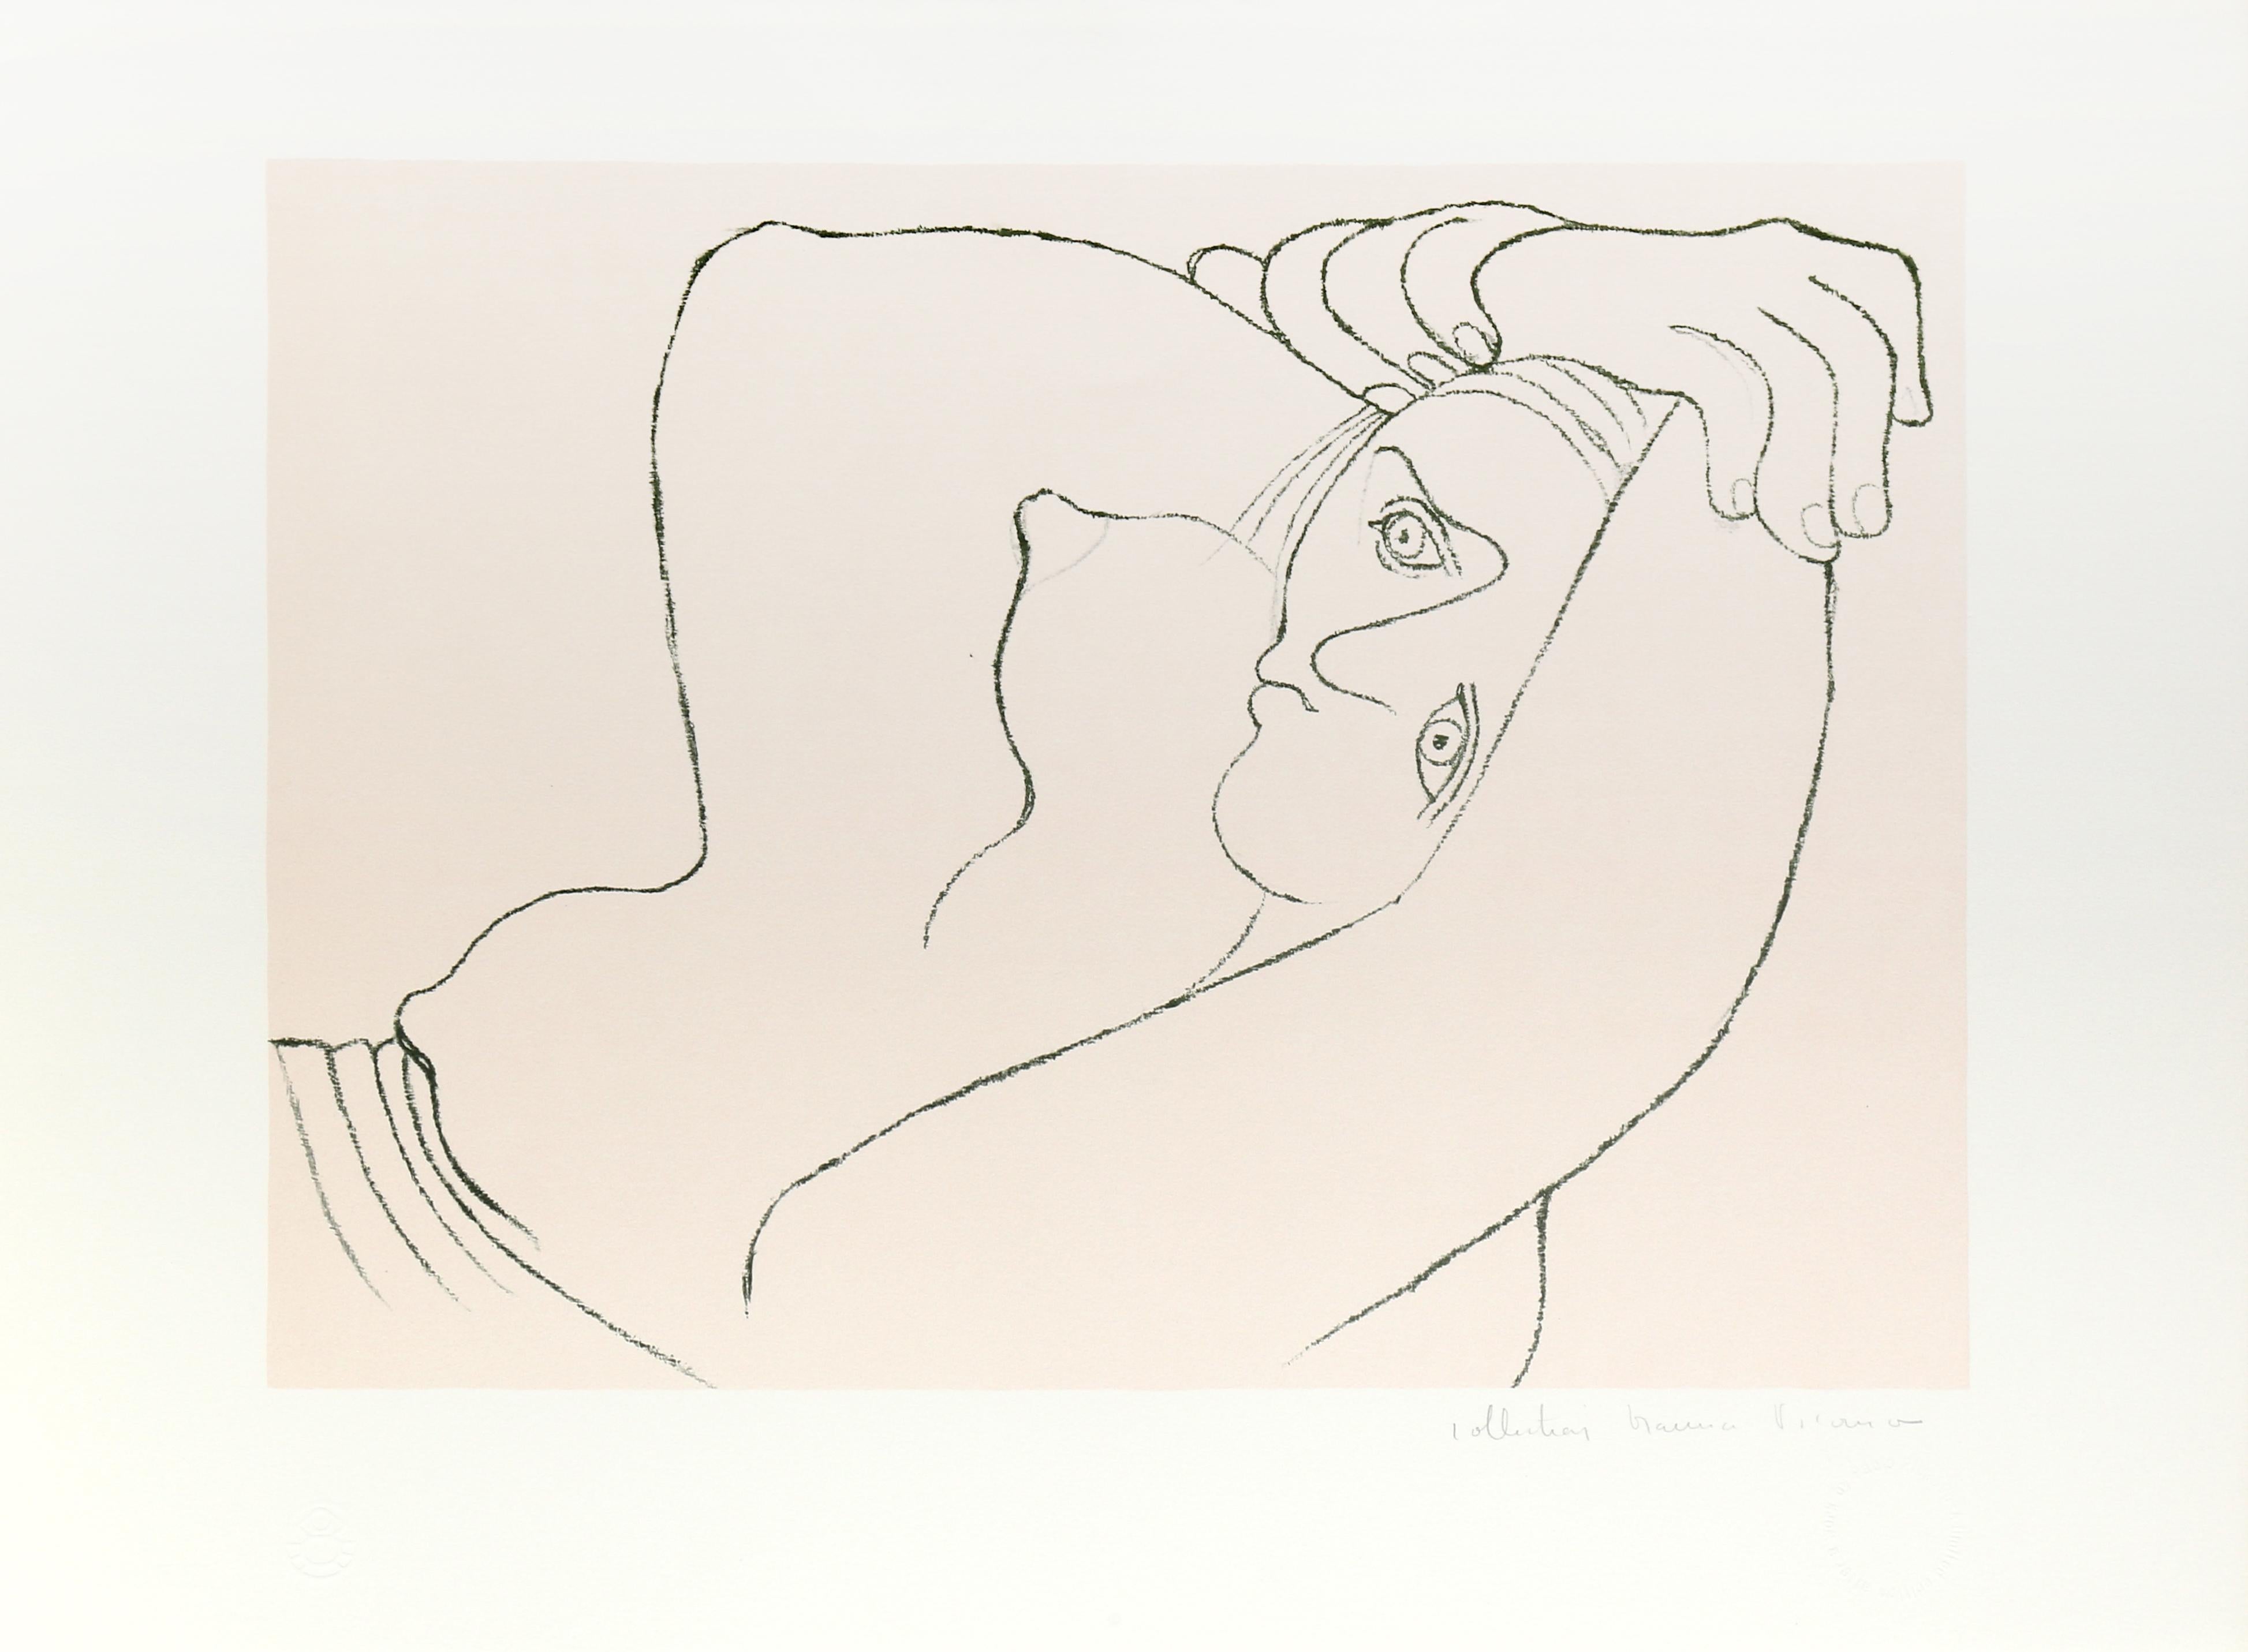 Femme Couchee, Cubist Lithograph by Pablo Picasso